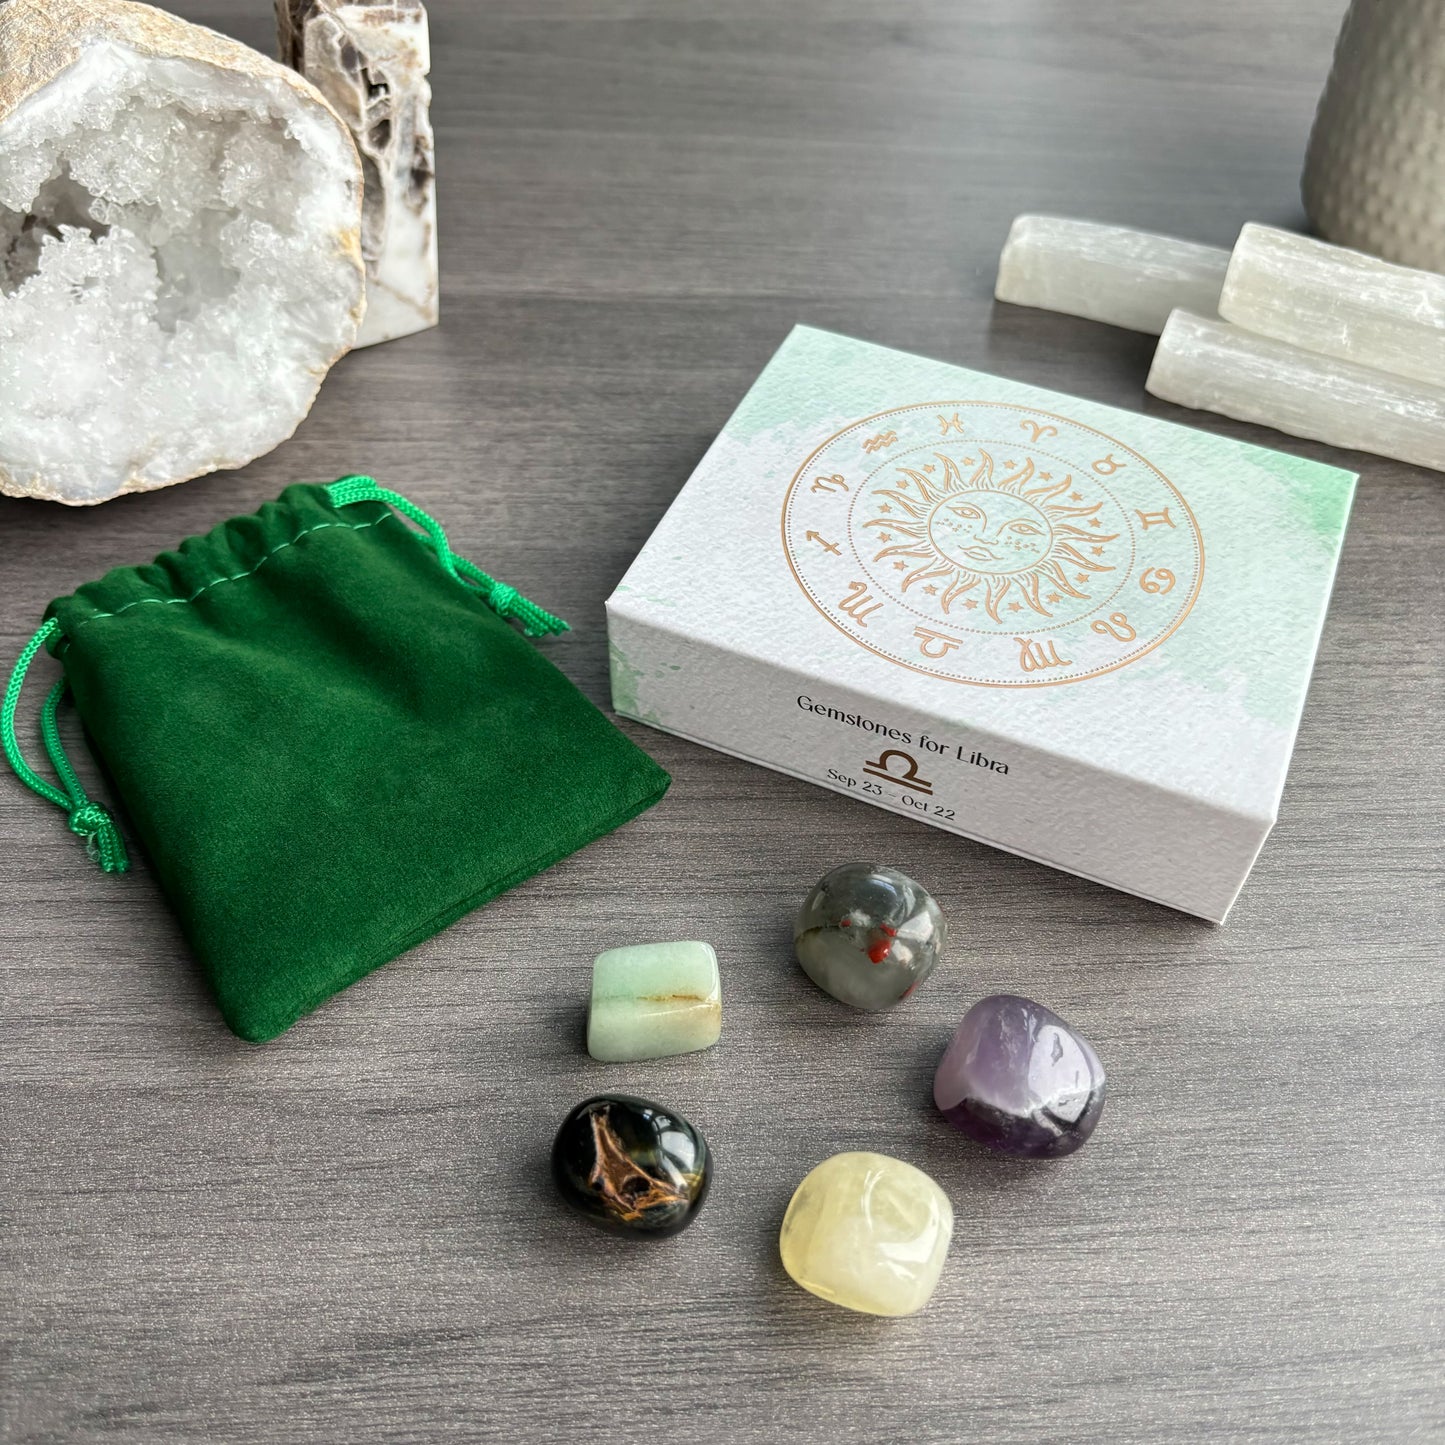 This stunning set of five crystal tumblestones are perfect for the generous, charming and well-balanced Libra  The set includes; Bloodstone for power, Green Aventurine for opportunity, Amethyst for peace, Tiger's Eye for courage and Lemon Quartz for clarity  Beautifully presented in a magnetic closure gift box with information regarding each crystal, and a velvet drawstring bag to keep the your crystals protected